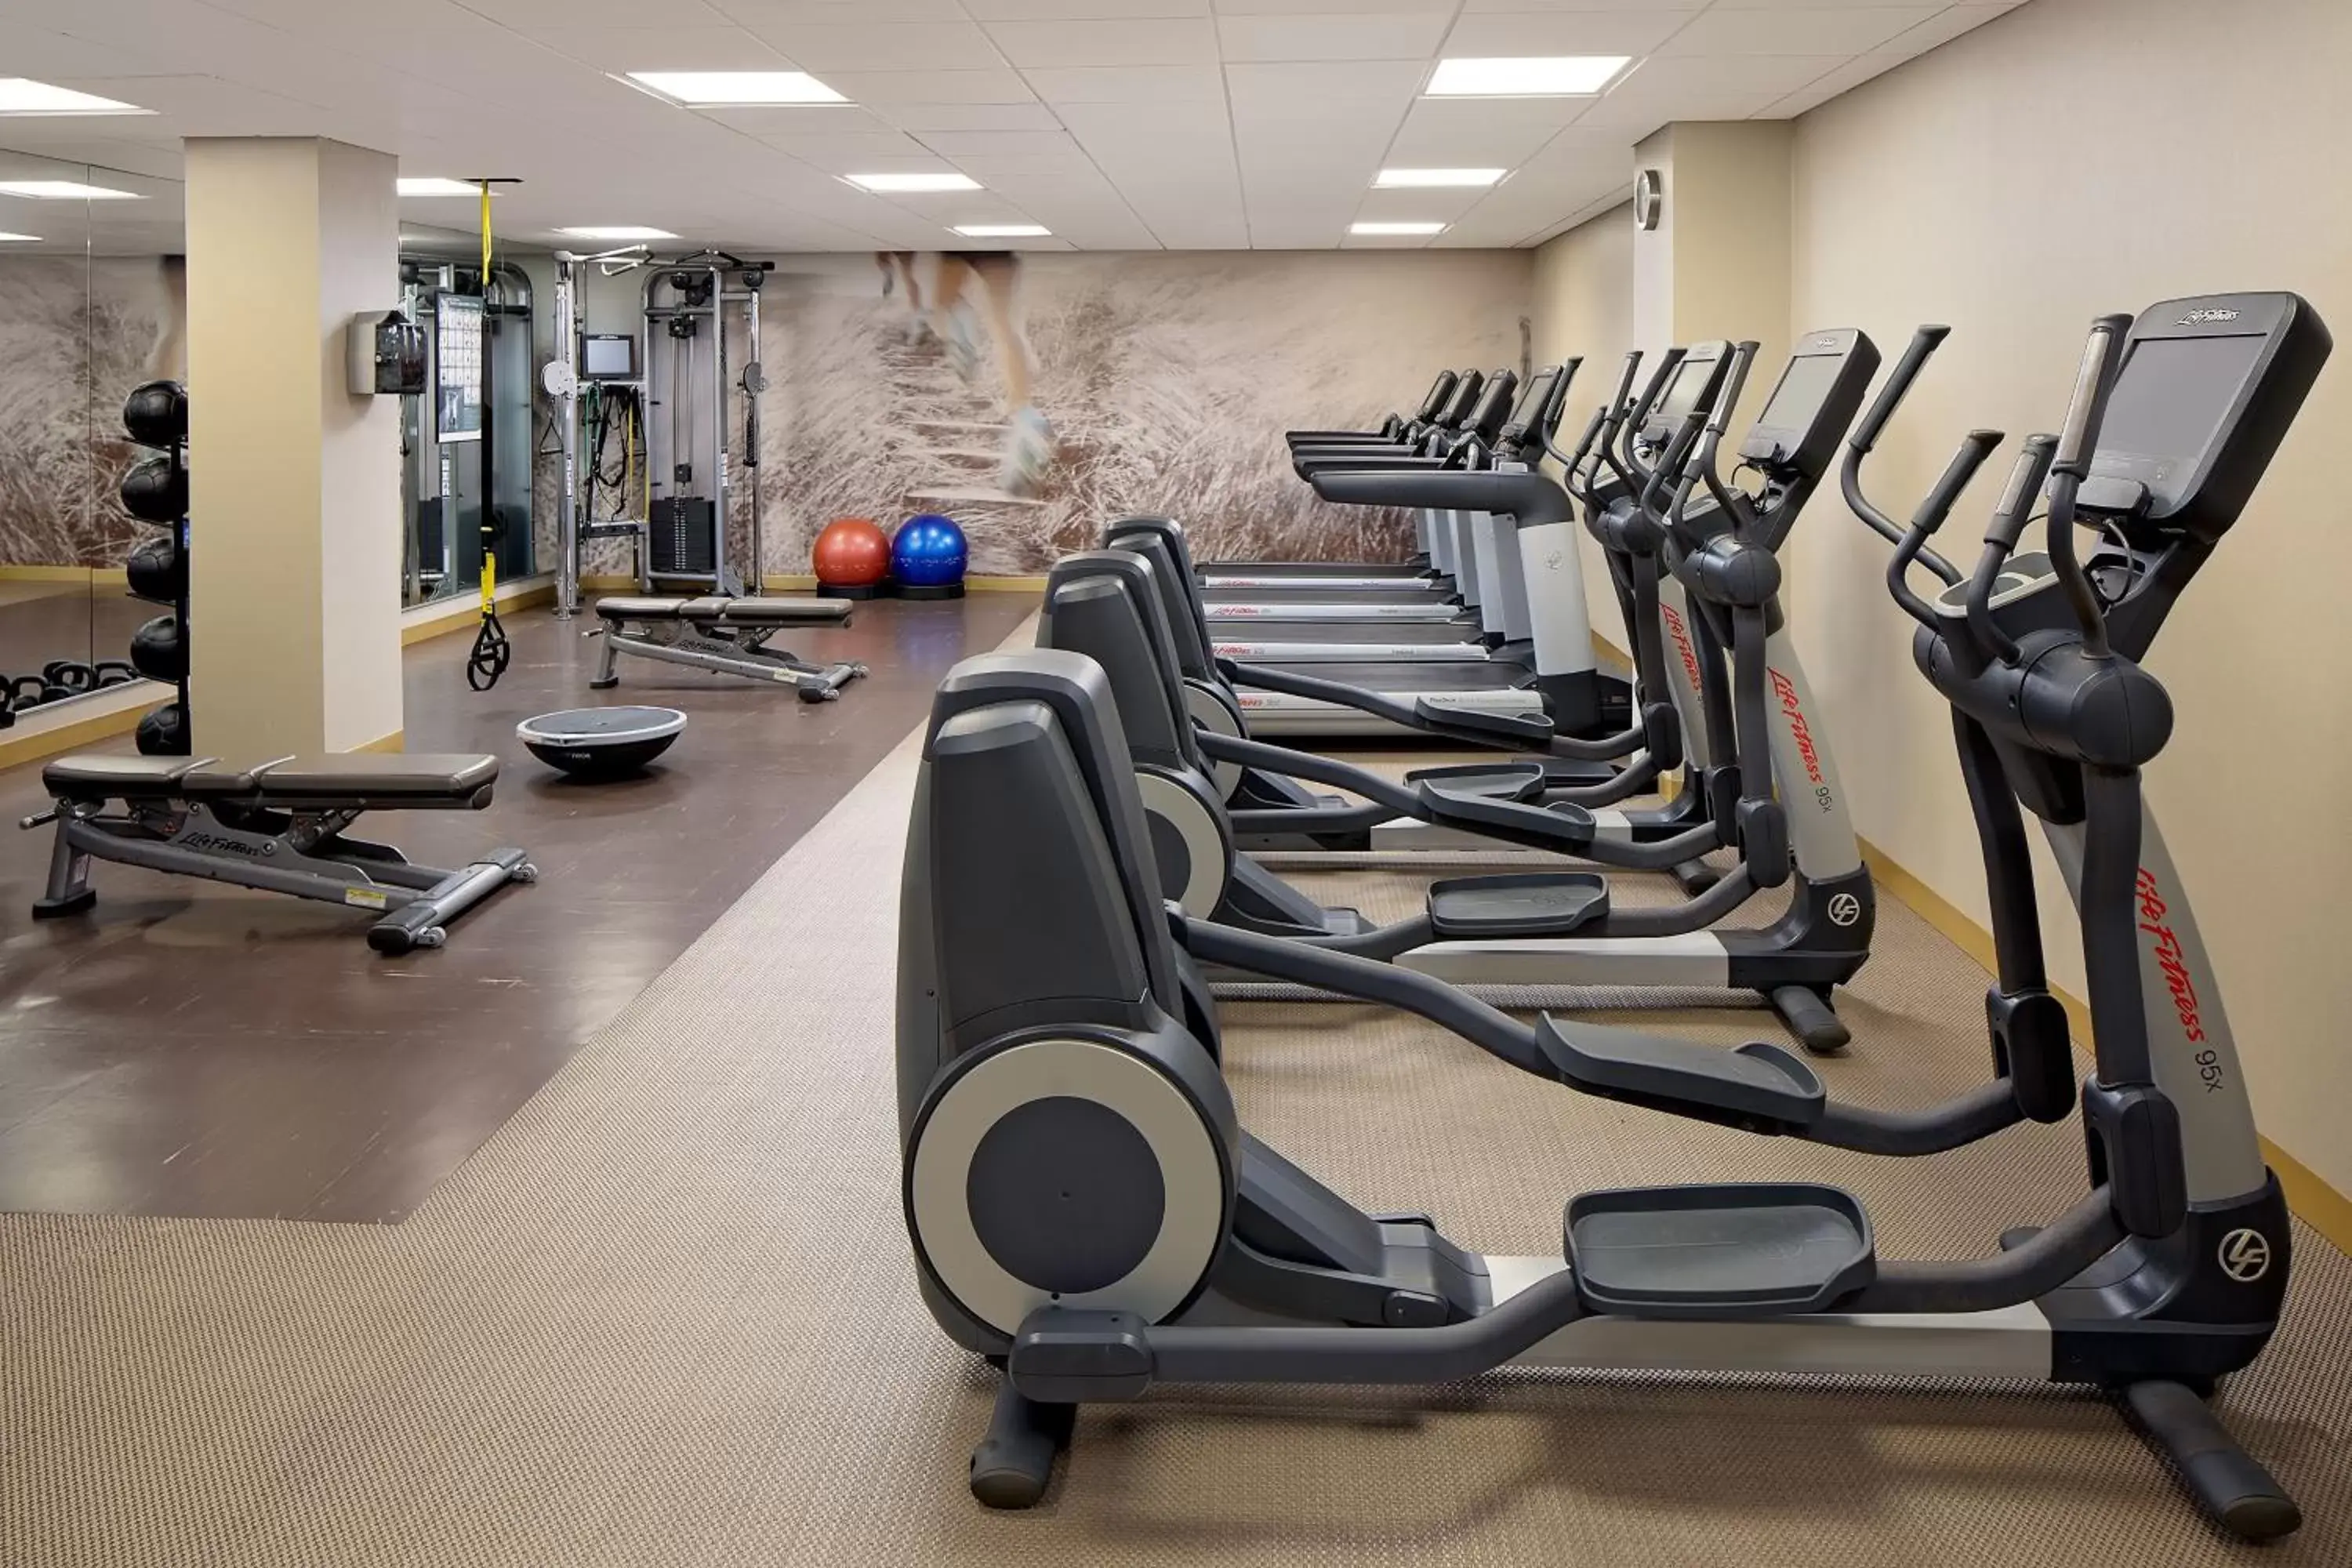 Fitness centre/facilities, Fitness Center/Facilities in The Westin Governor Morris, Morristown